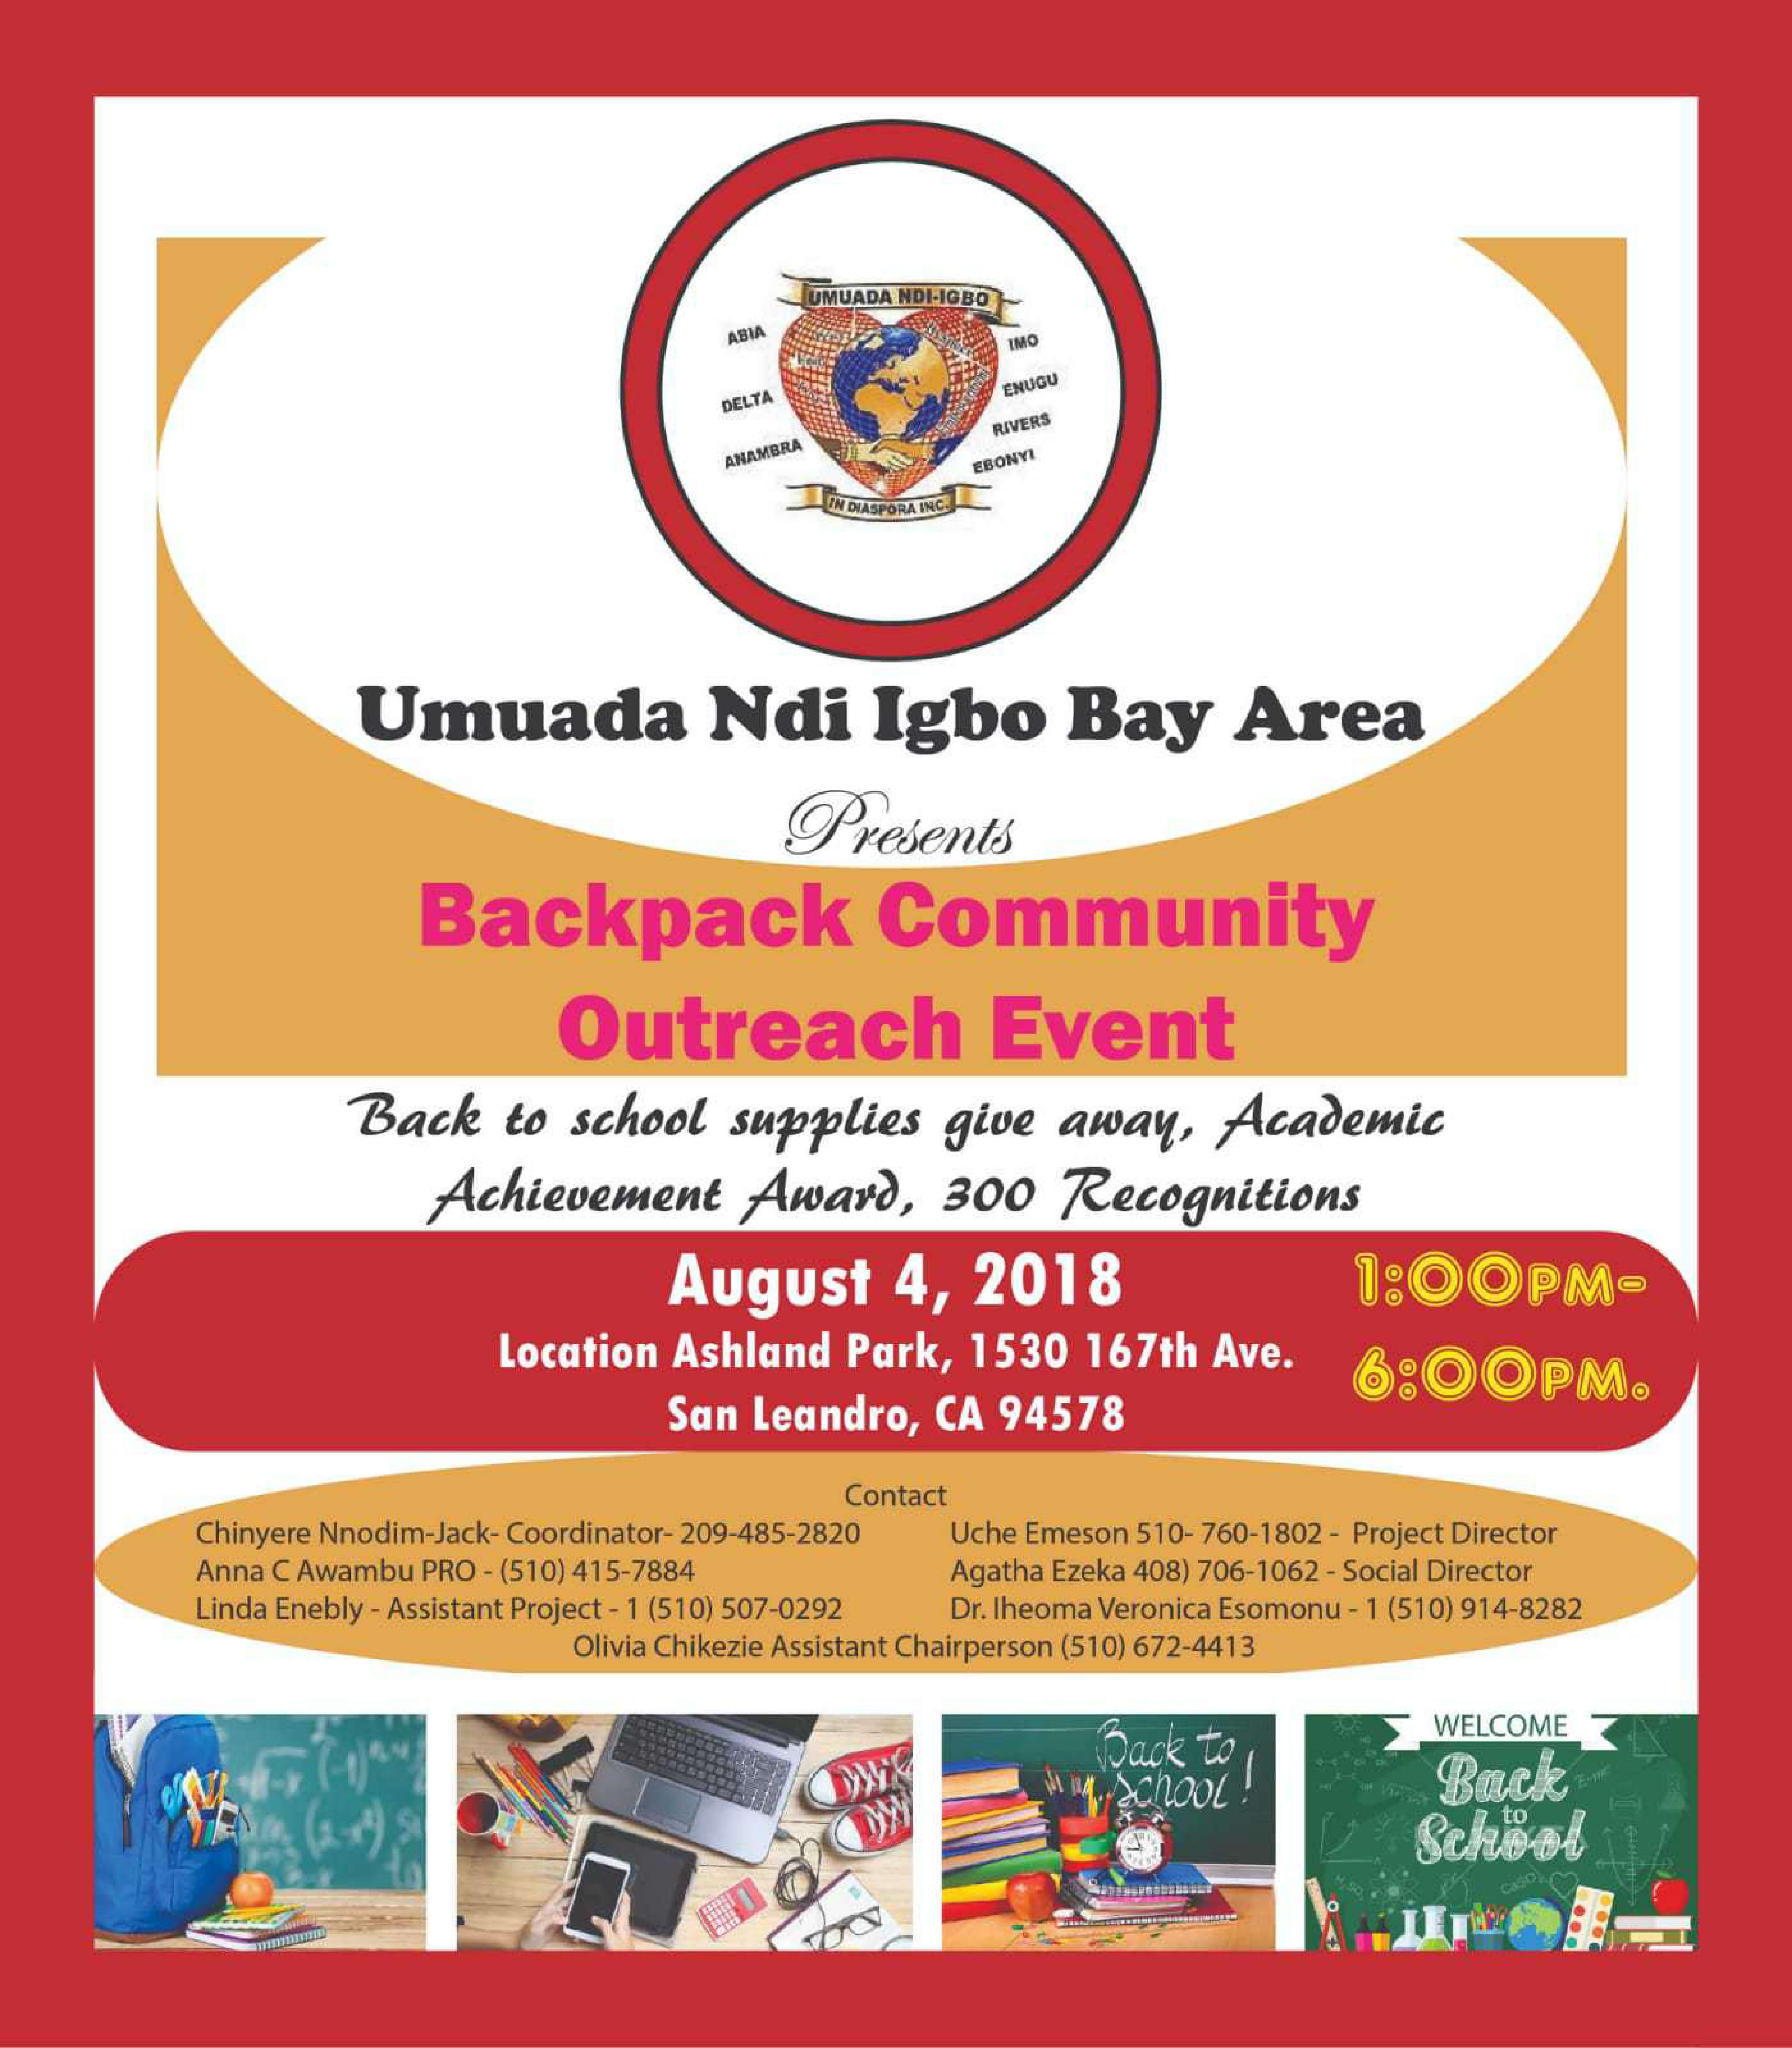 Backpack Community Outreach Event